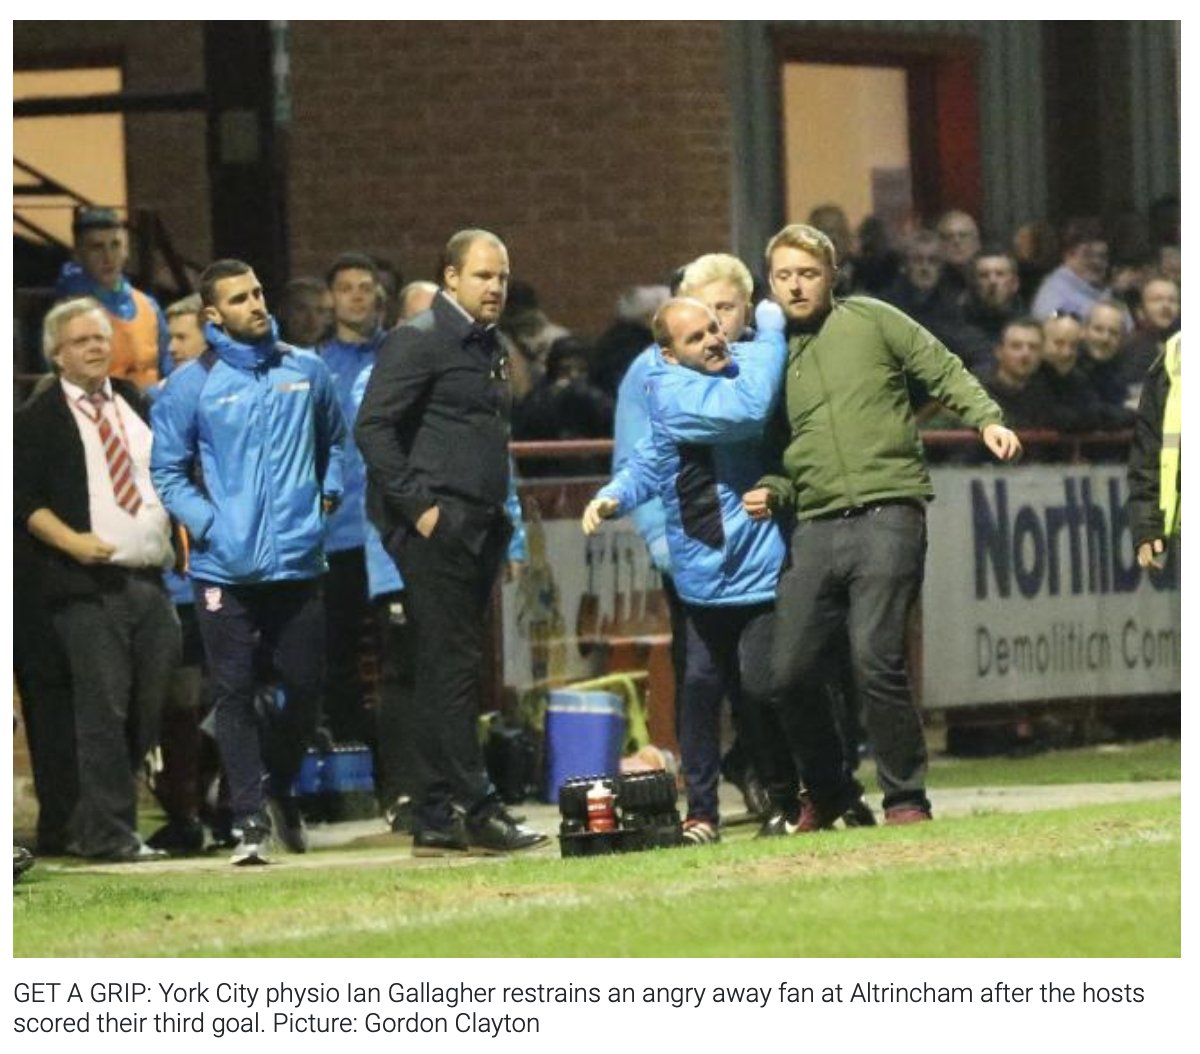 Collins' reign turns sour, with a dire performance coupled with a 3-0 defeat away at Altrincham after exiting the FA Cup. One York supporter marches towards the away dugout after one of the goal, having to be restrained by the physio.